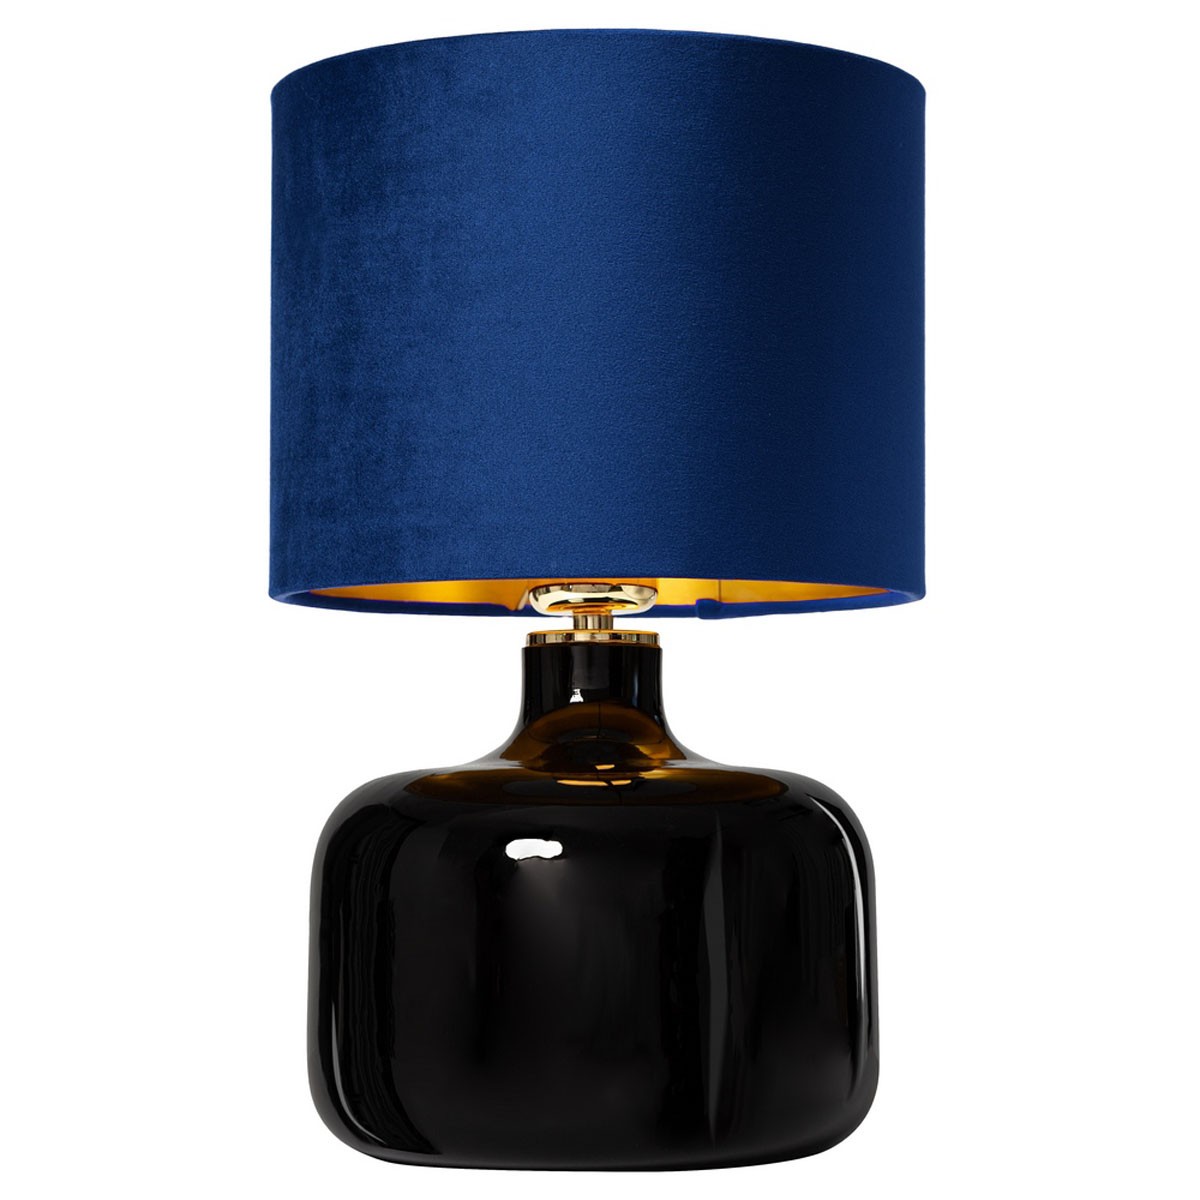 Standing Lamp Lora Table Navy Blue, Navy Blue And Gold Table Lamps